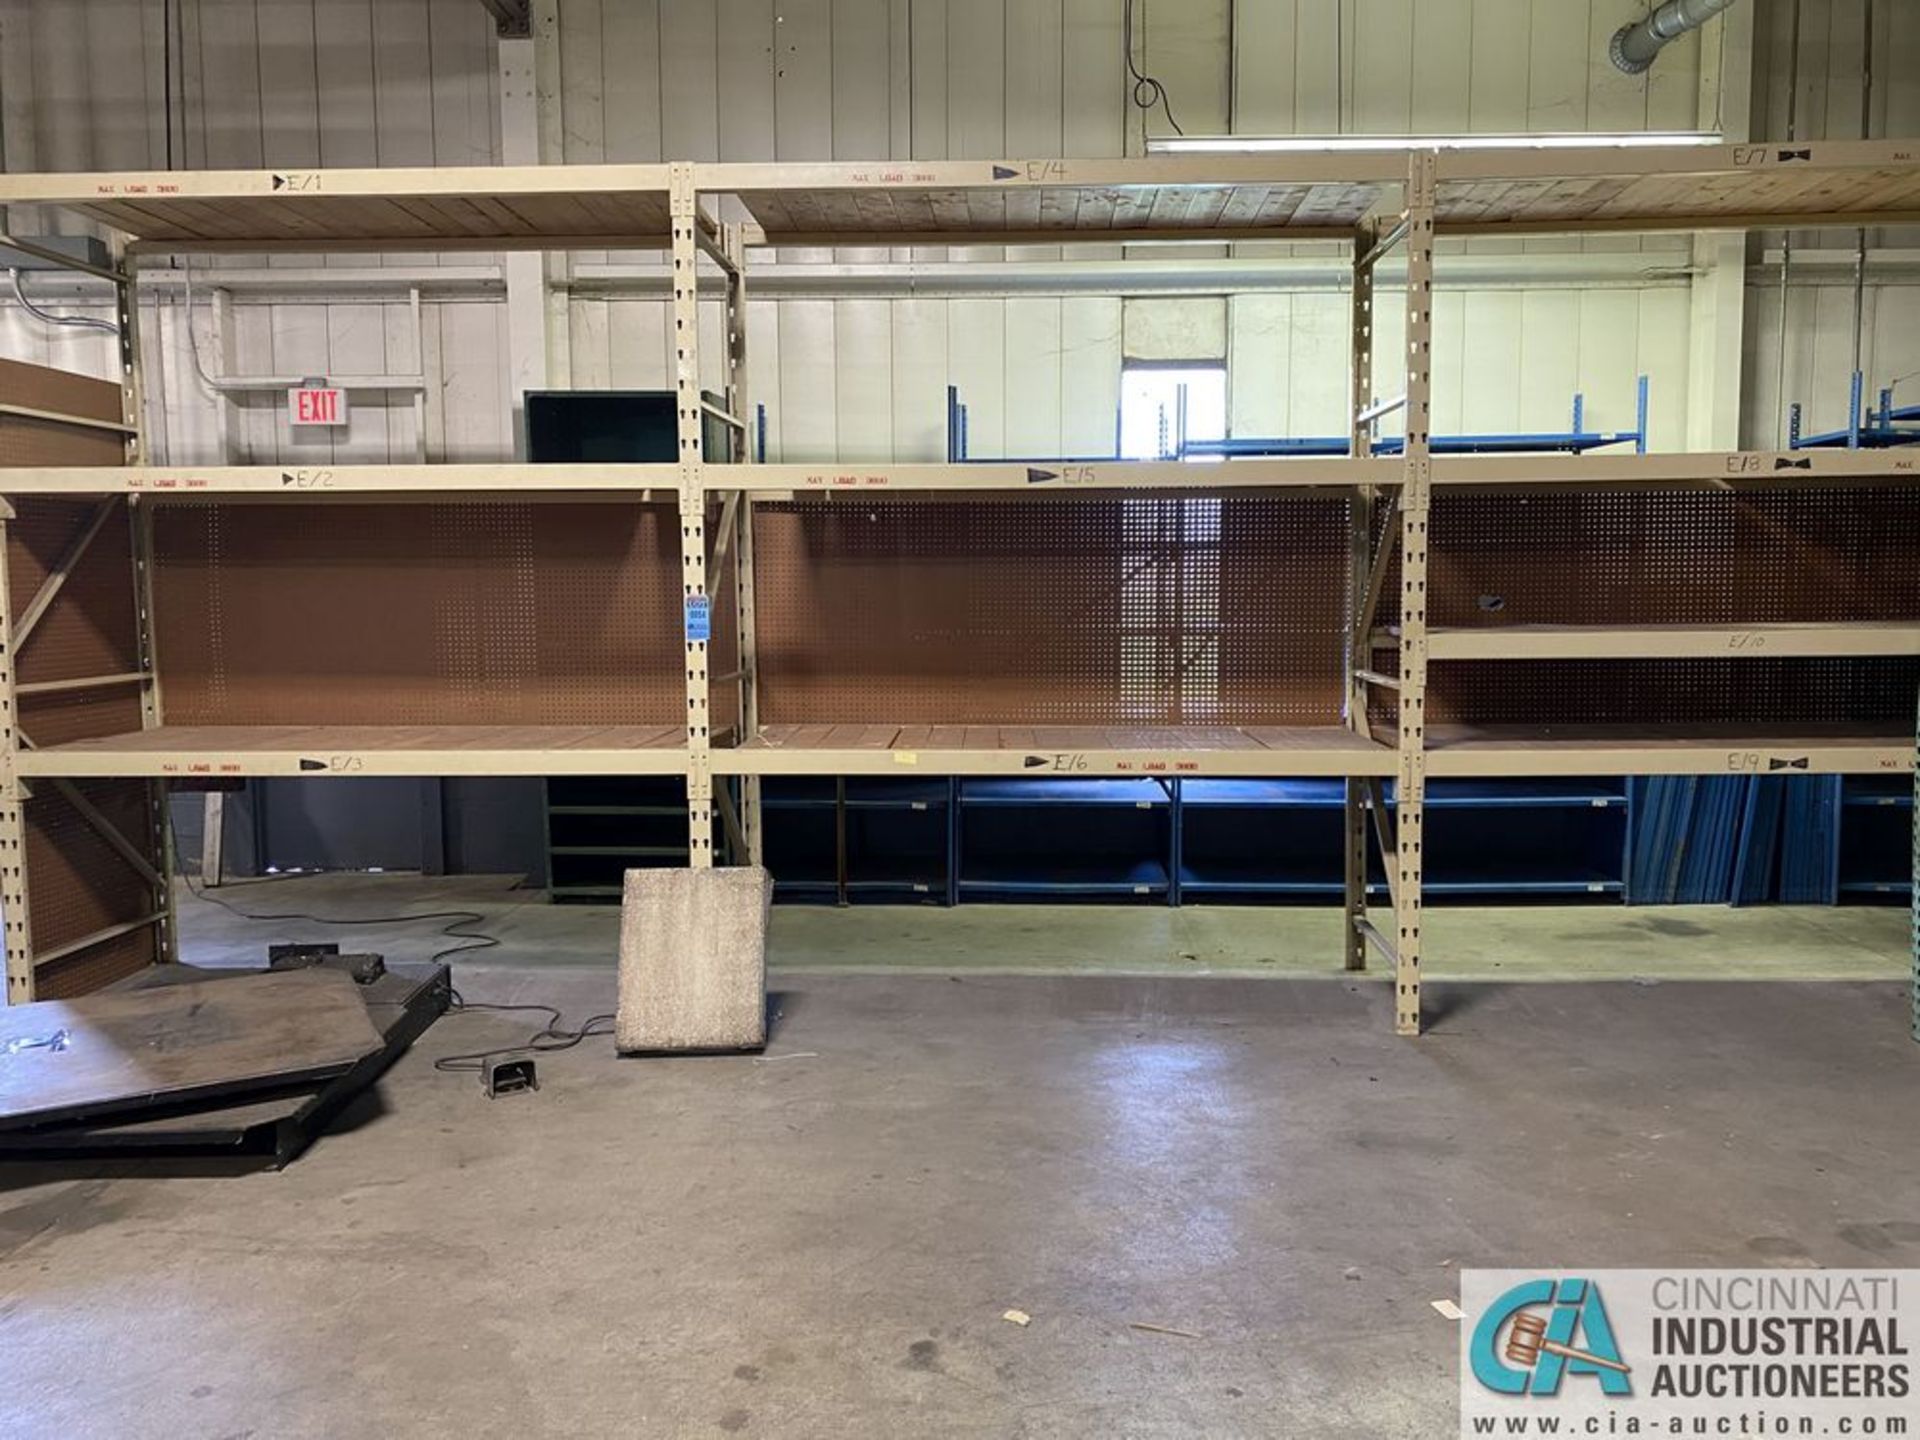 SECTIONS 36" X 96" X 10' PALLET RACK WITH WOOD DECKING, (4) UPRIGHTS, AND (20) BEAMS